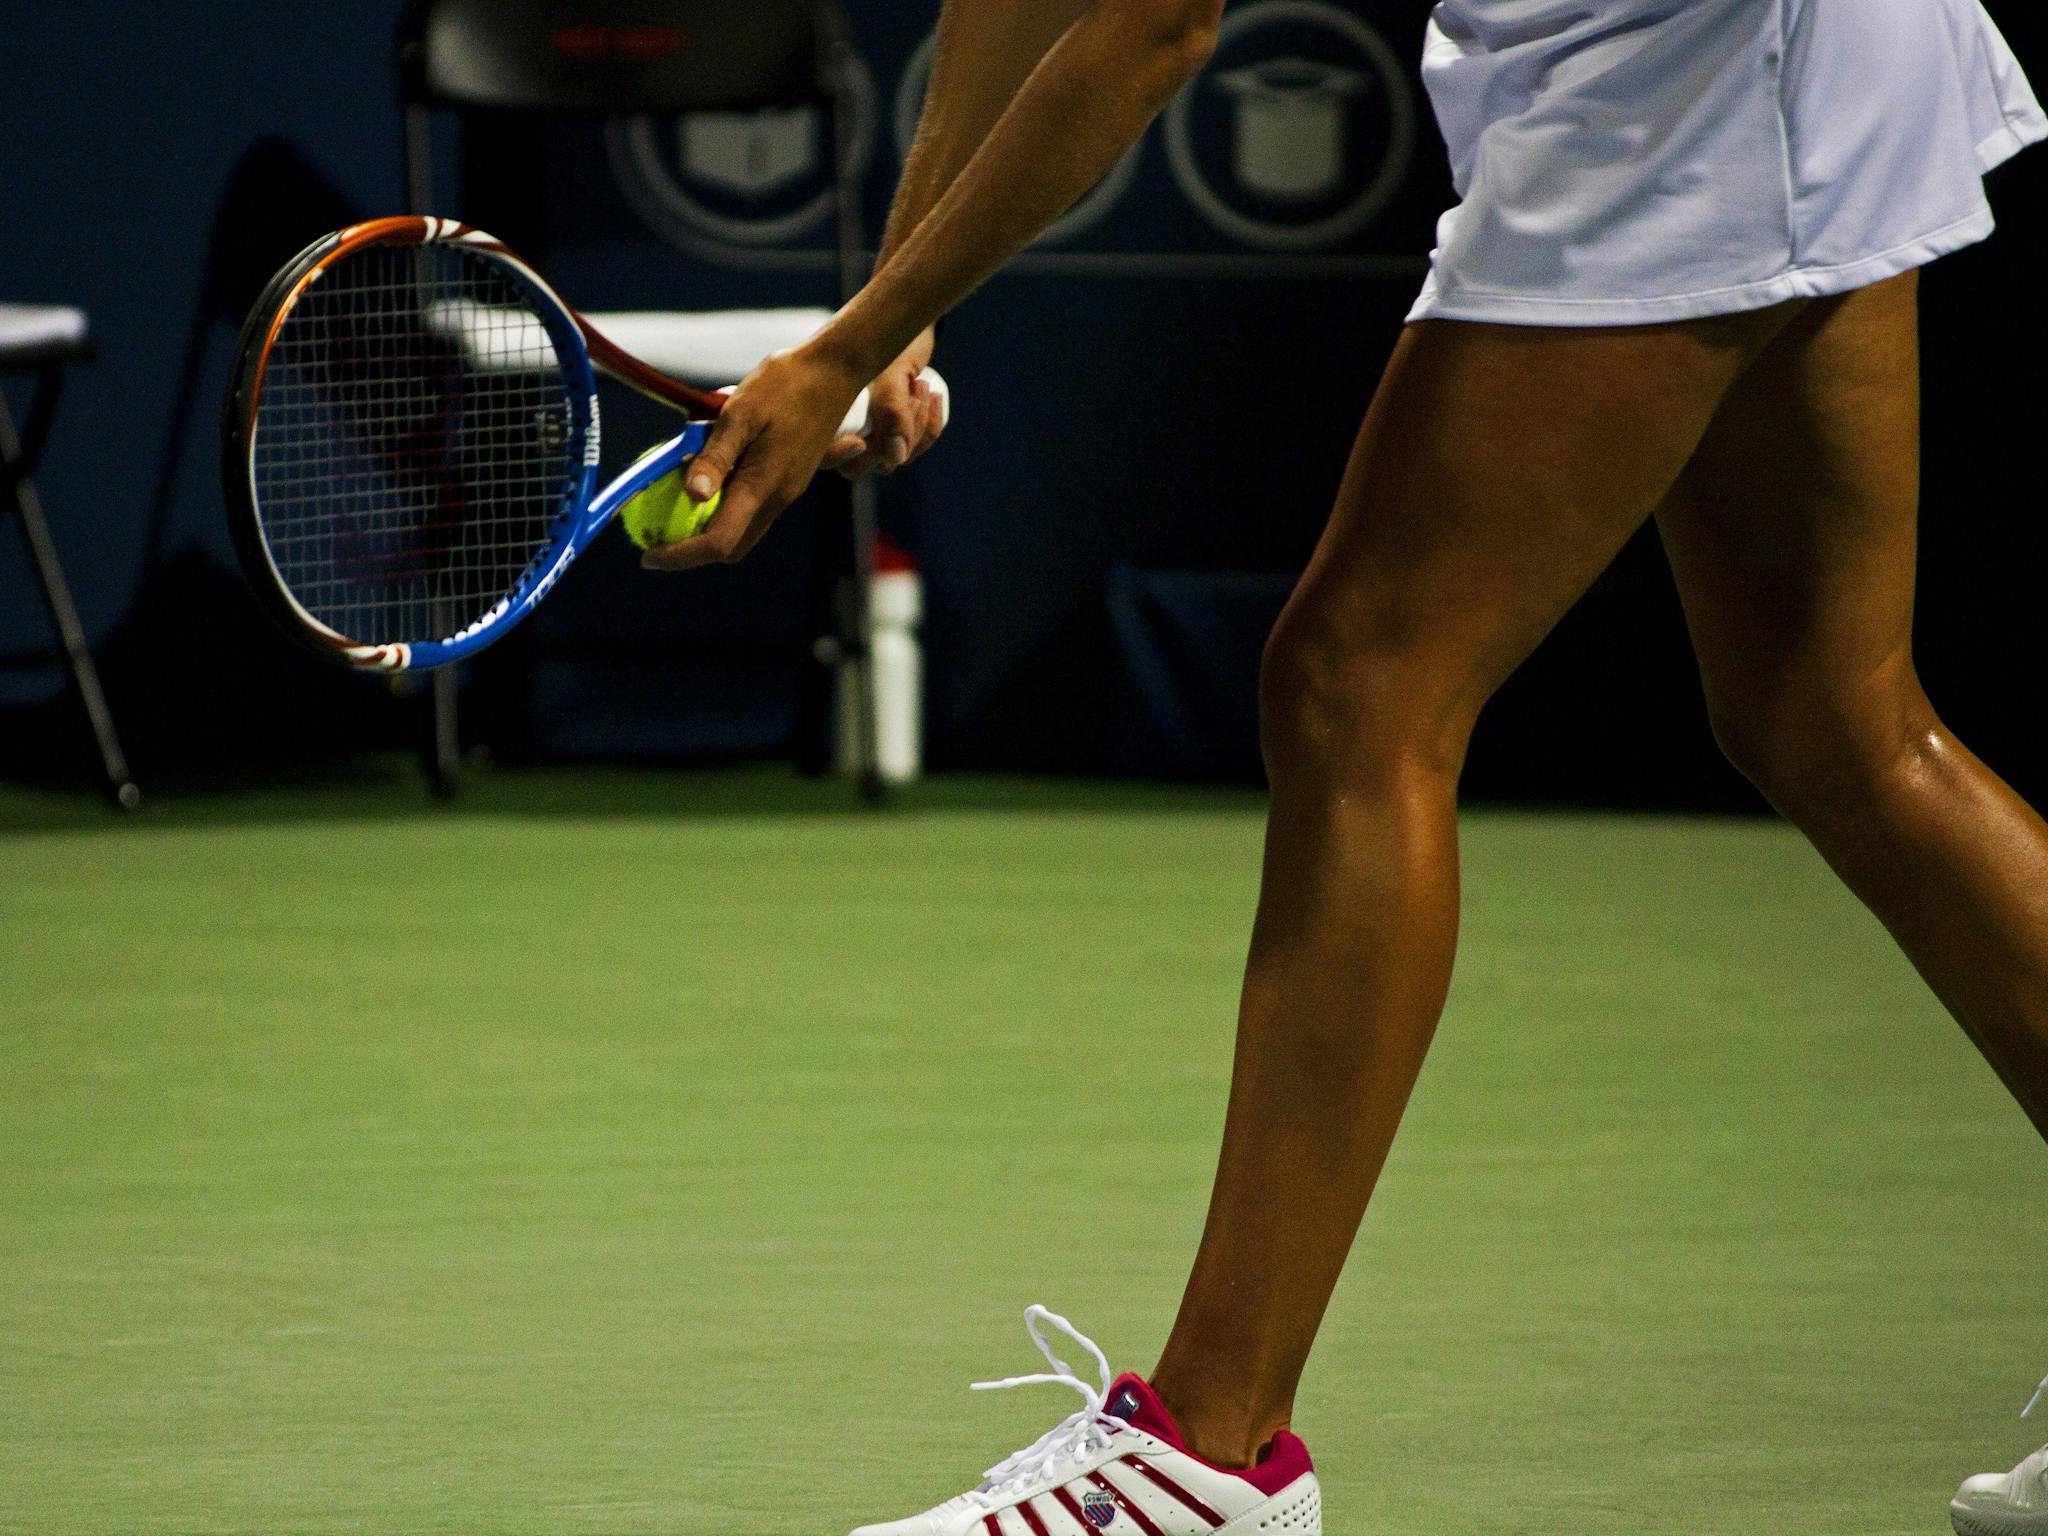 A female tennis player ready to serve